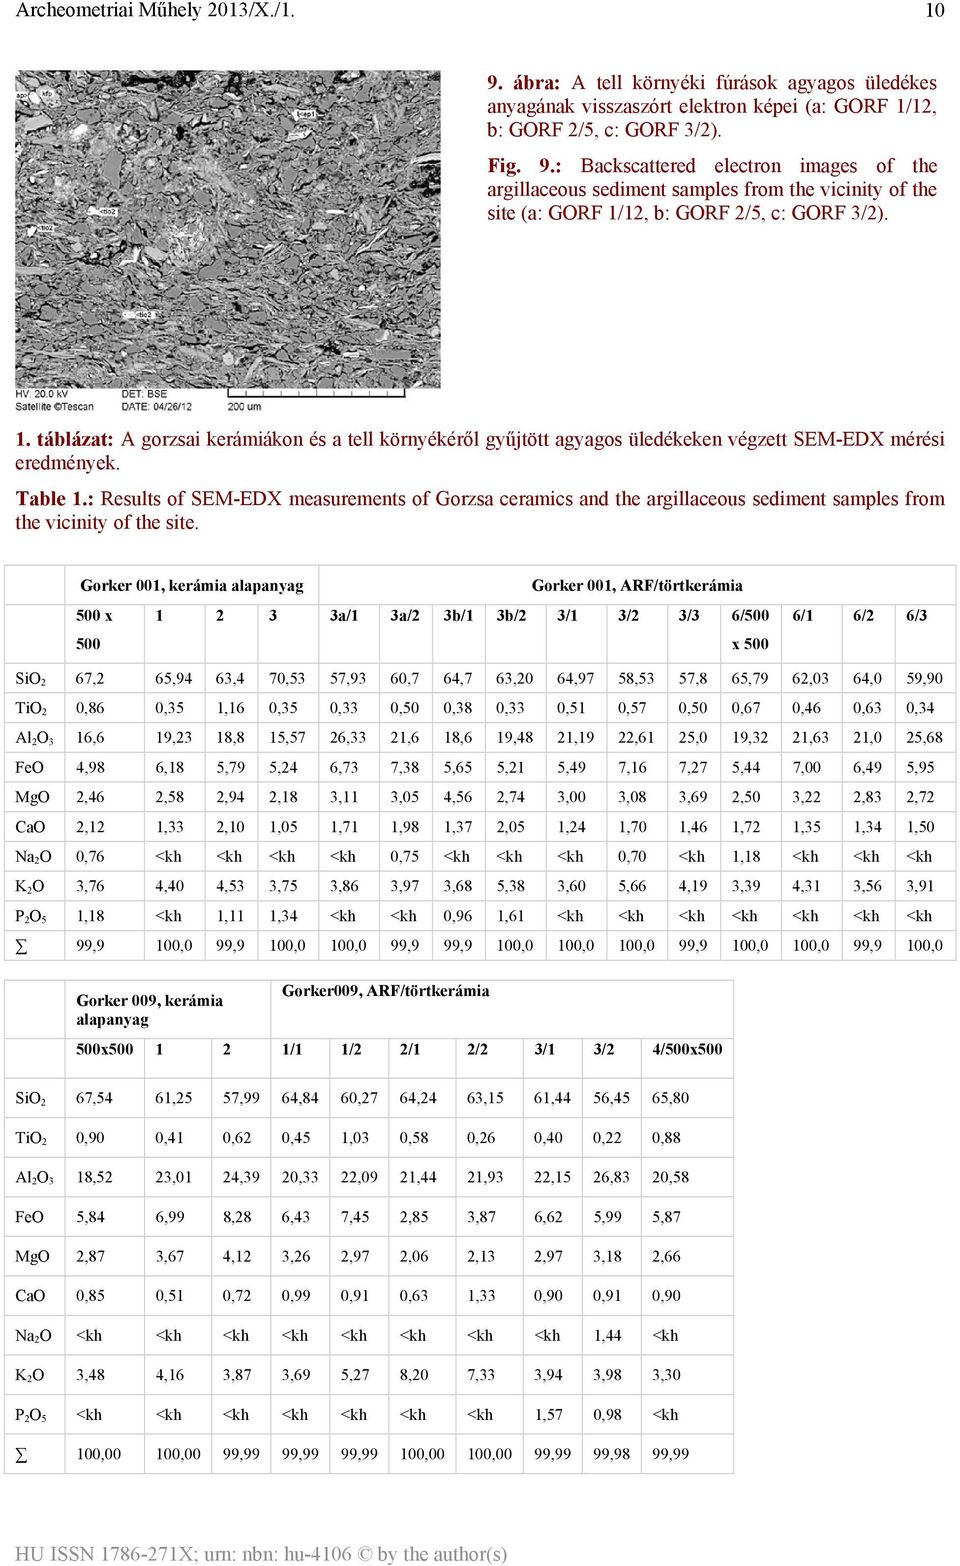 : Results of SEM-EDX measurements of Gorzsa ceramics and the argillaceous sediment samples from the vicinity of the site.